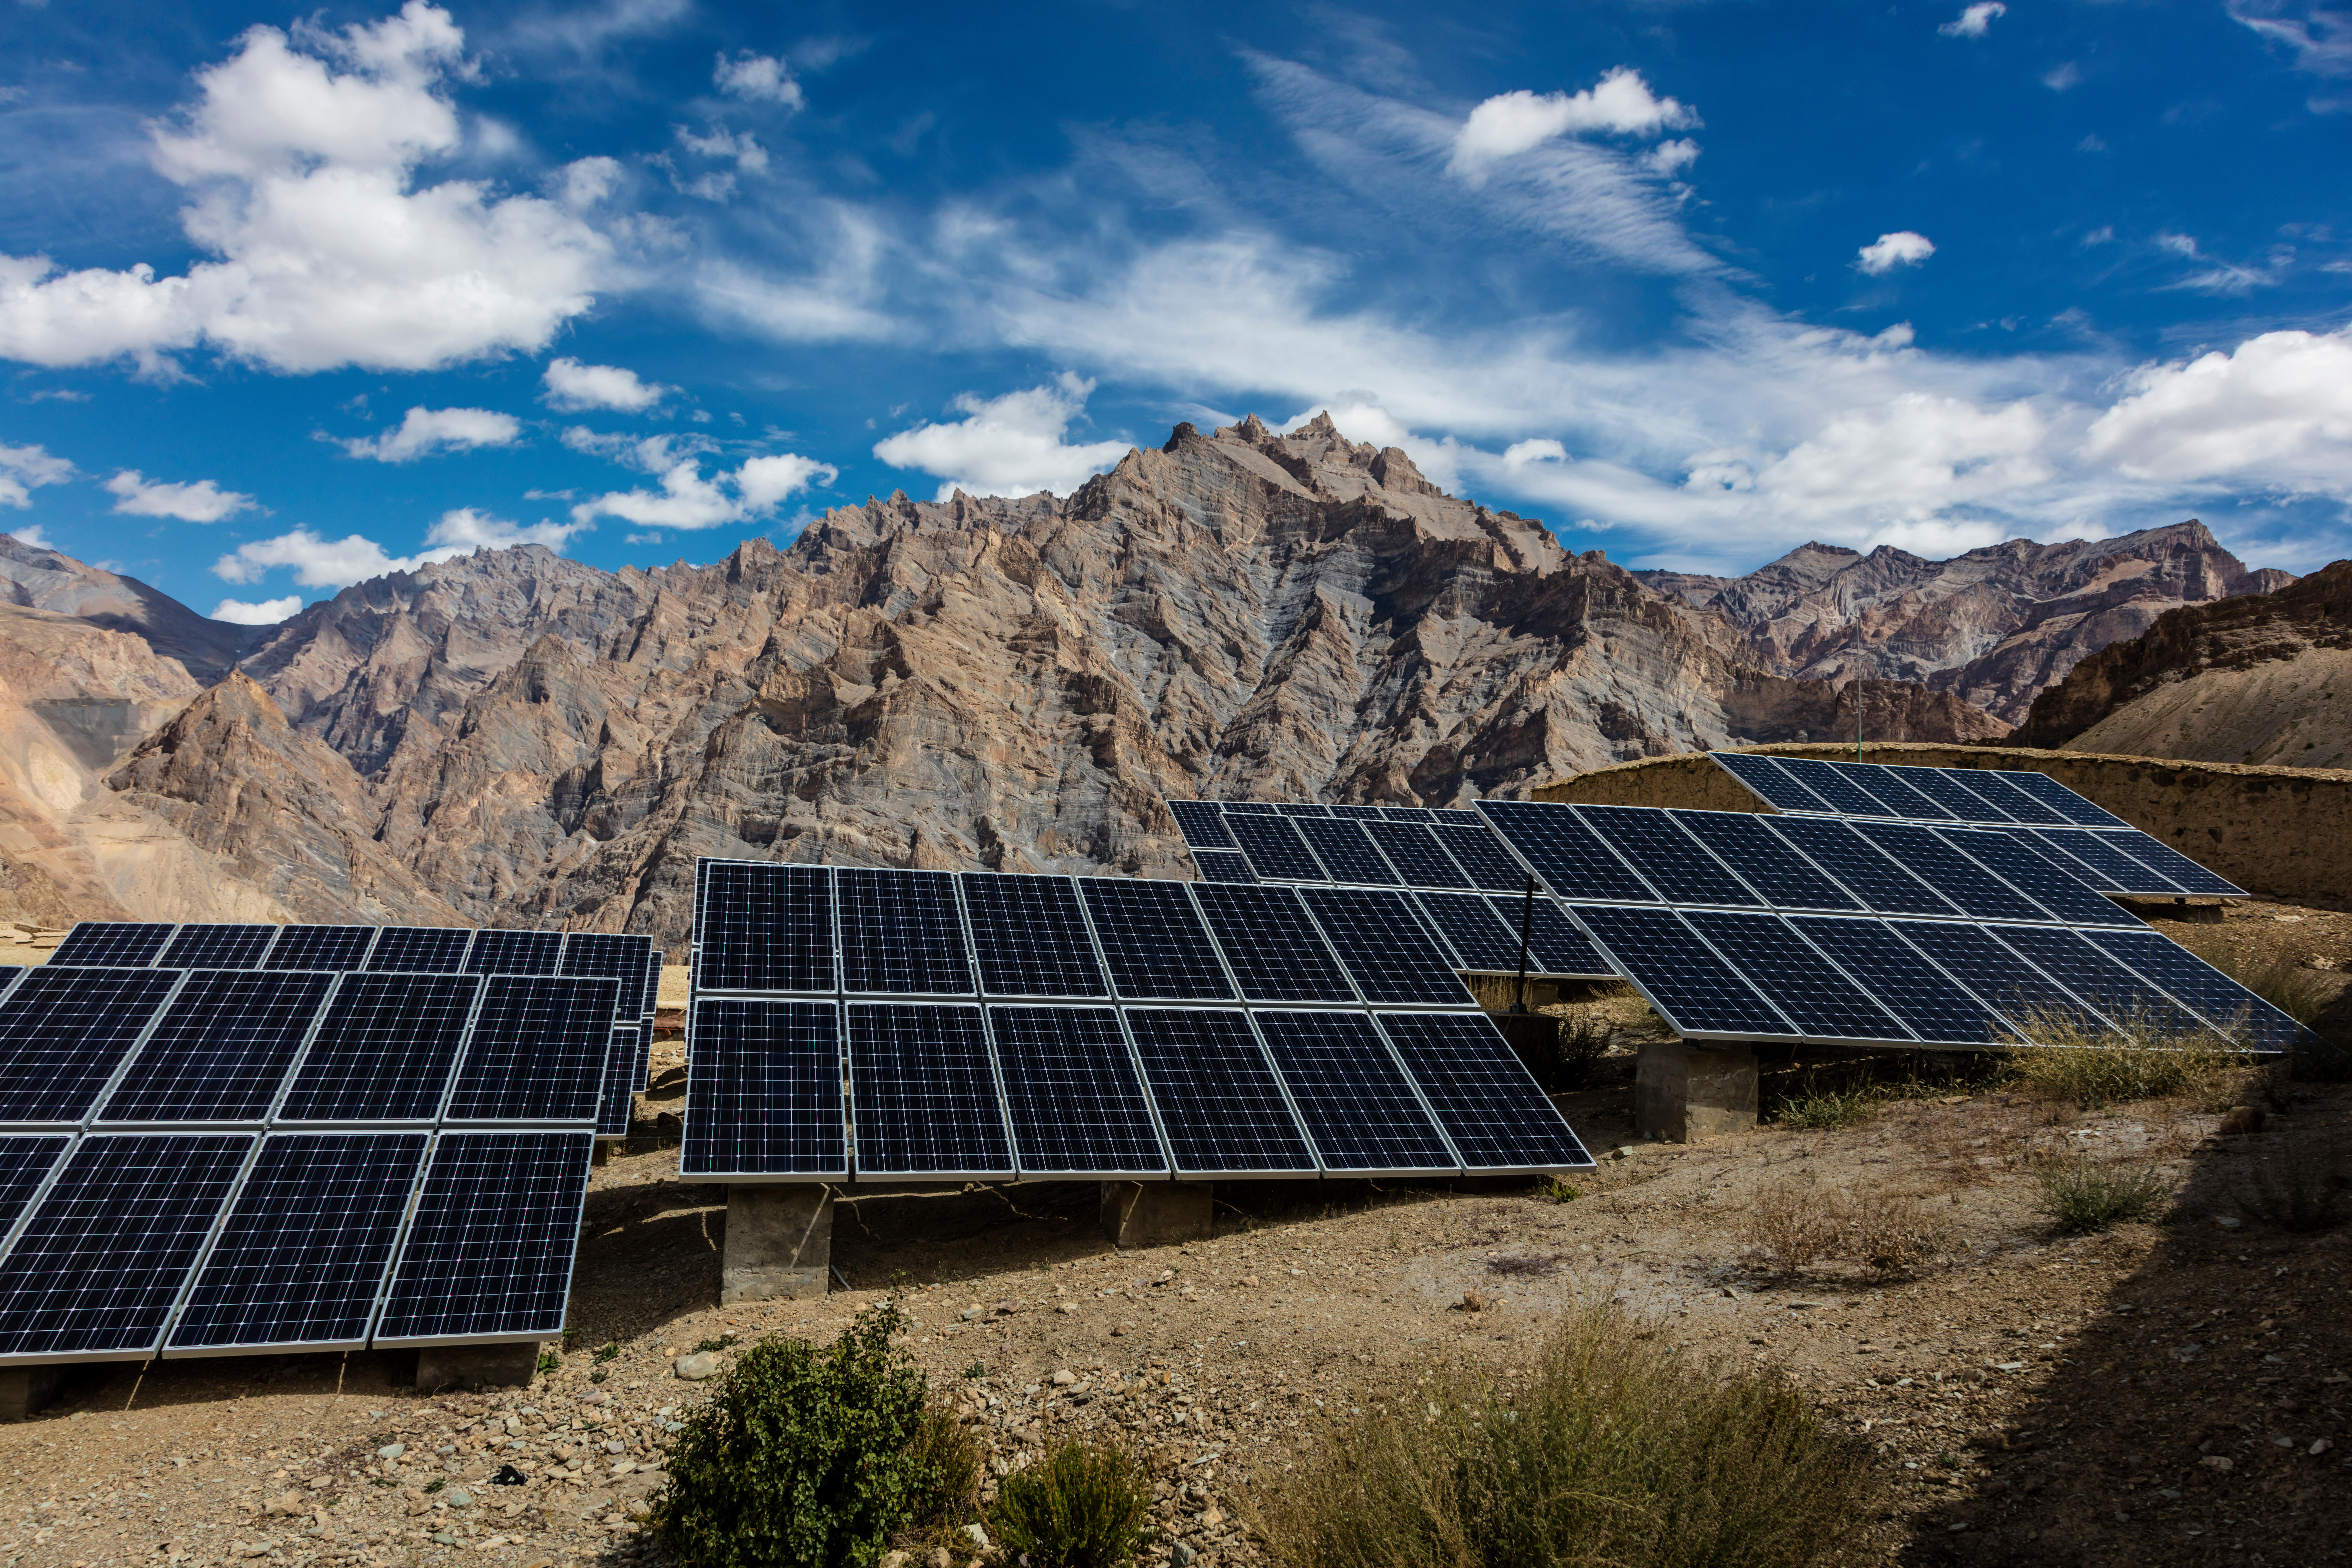 <p>Solar panels in Ladakh, India. The GGI-OSOWOG initiative, announced by India in partnership with the UK at COP26, aims to overcome issues of intermittent renewable energy by connecting grids. (Image: Craig Lovell / Eagle Visions Photography / Alamy)</p>